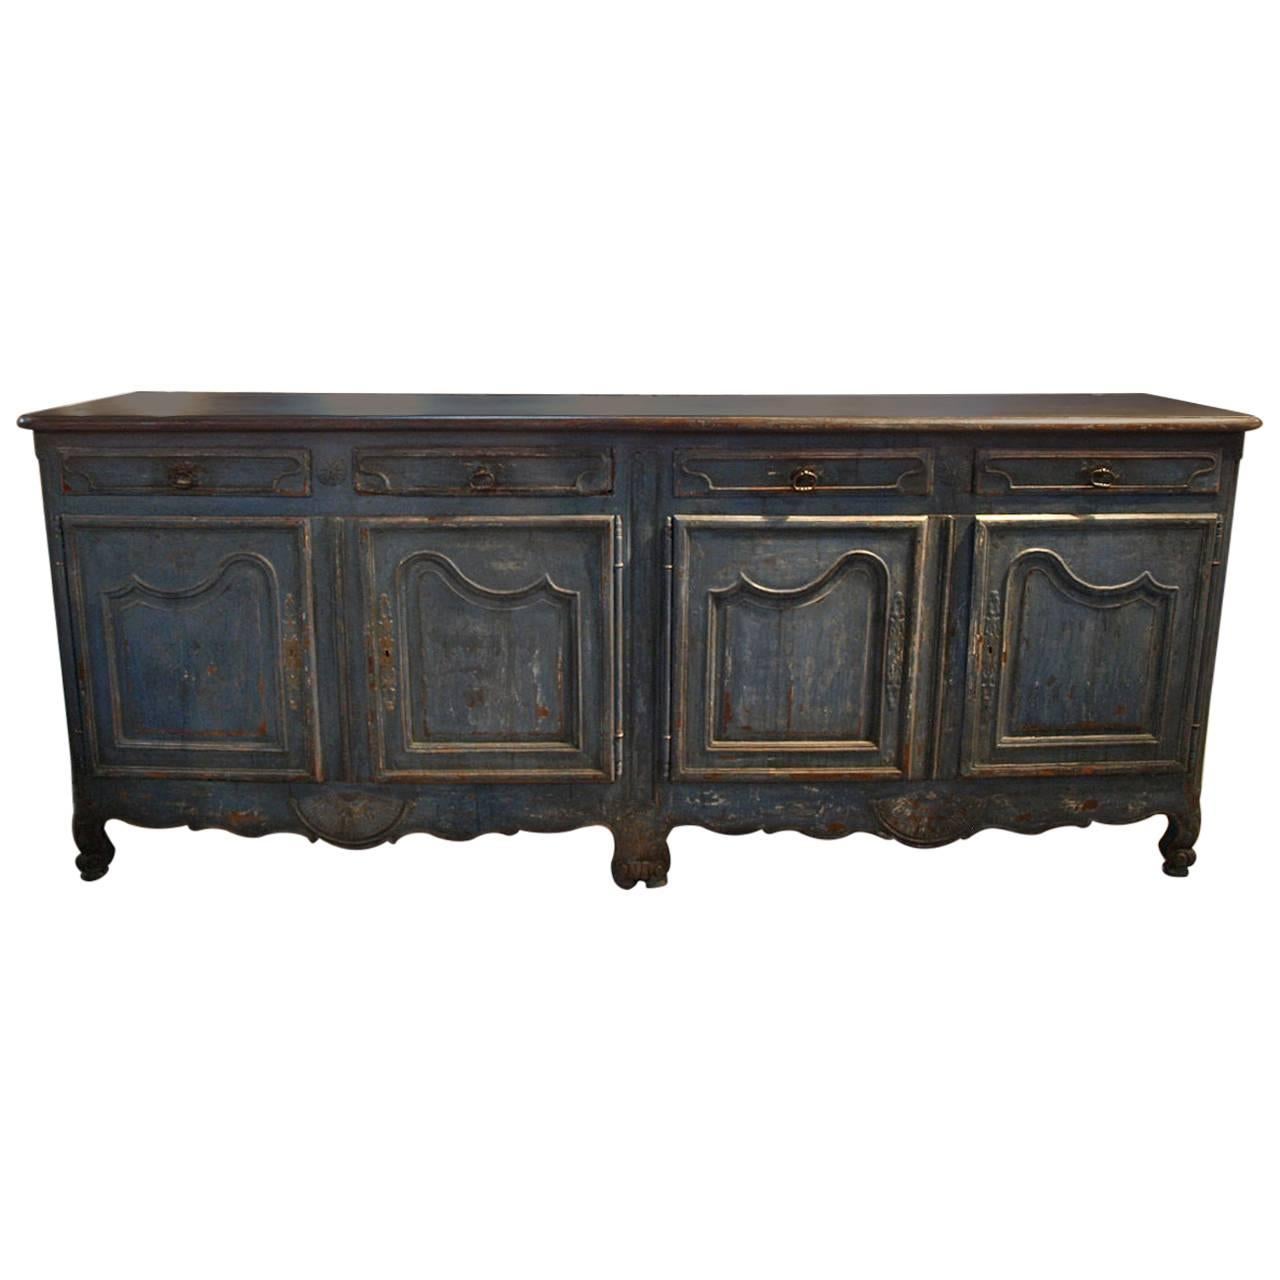 French 18th Century Enfilade Buffet In Painted Wood